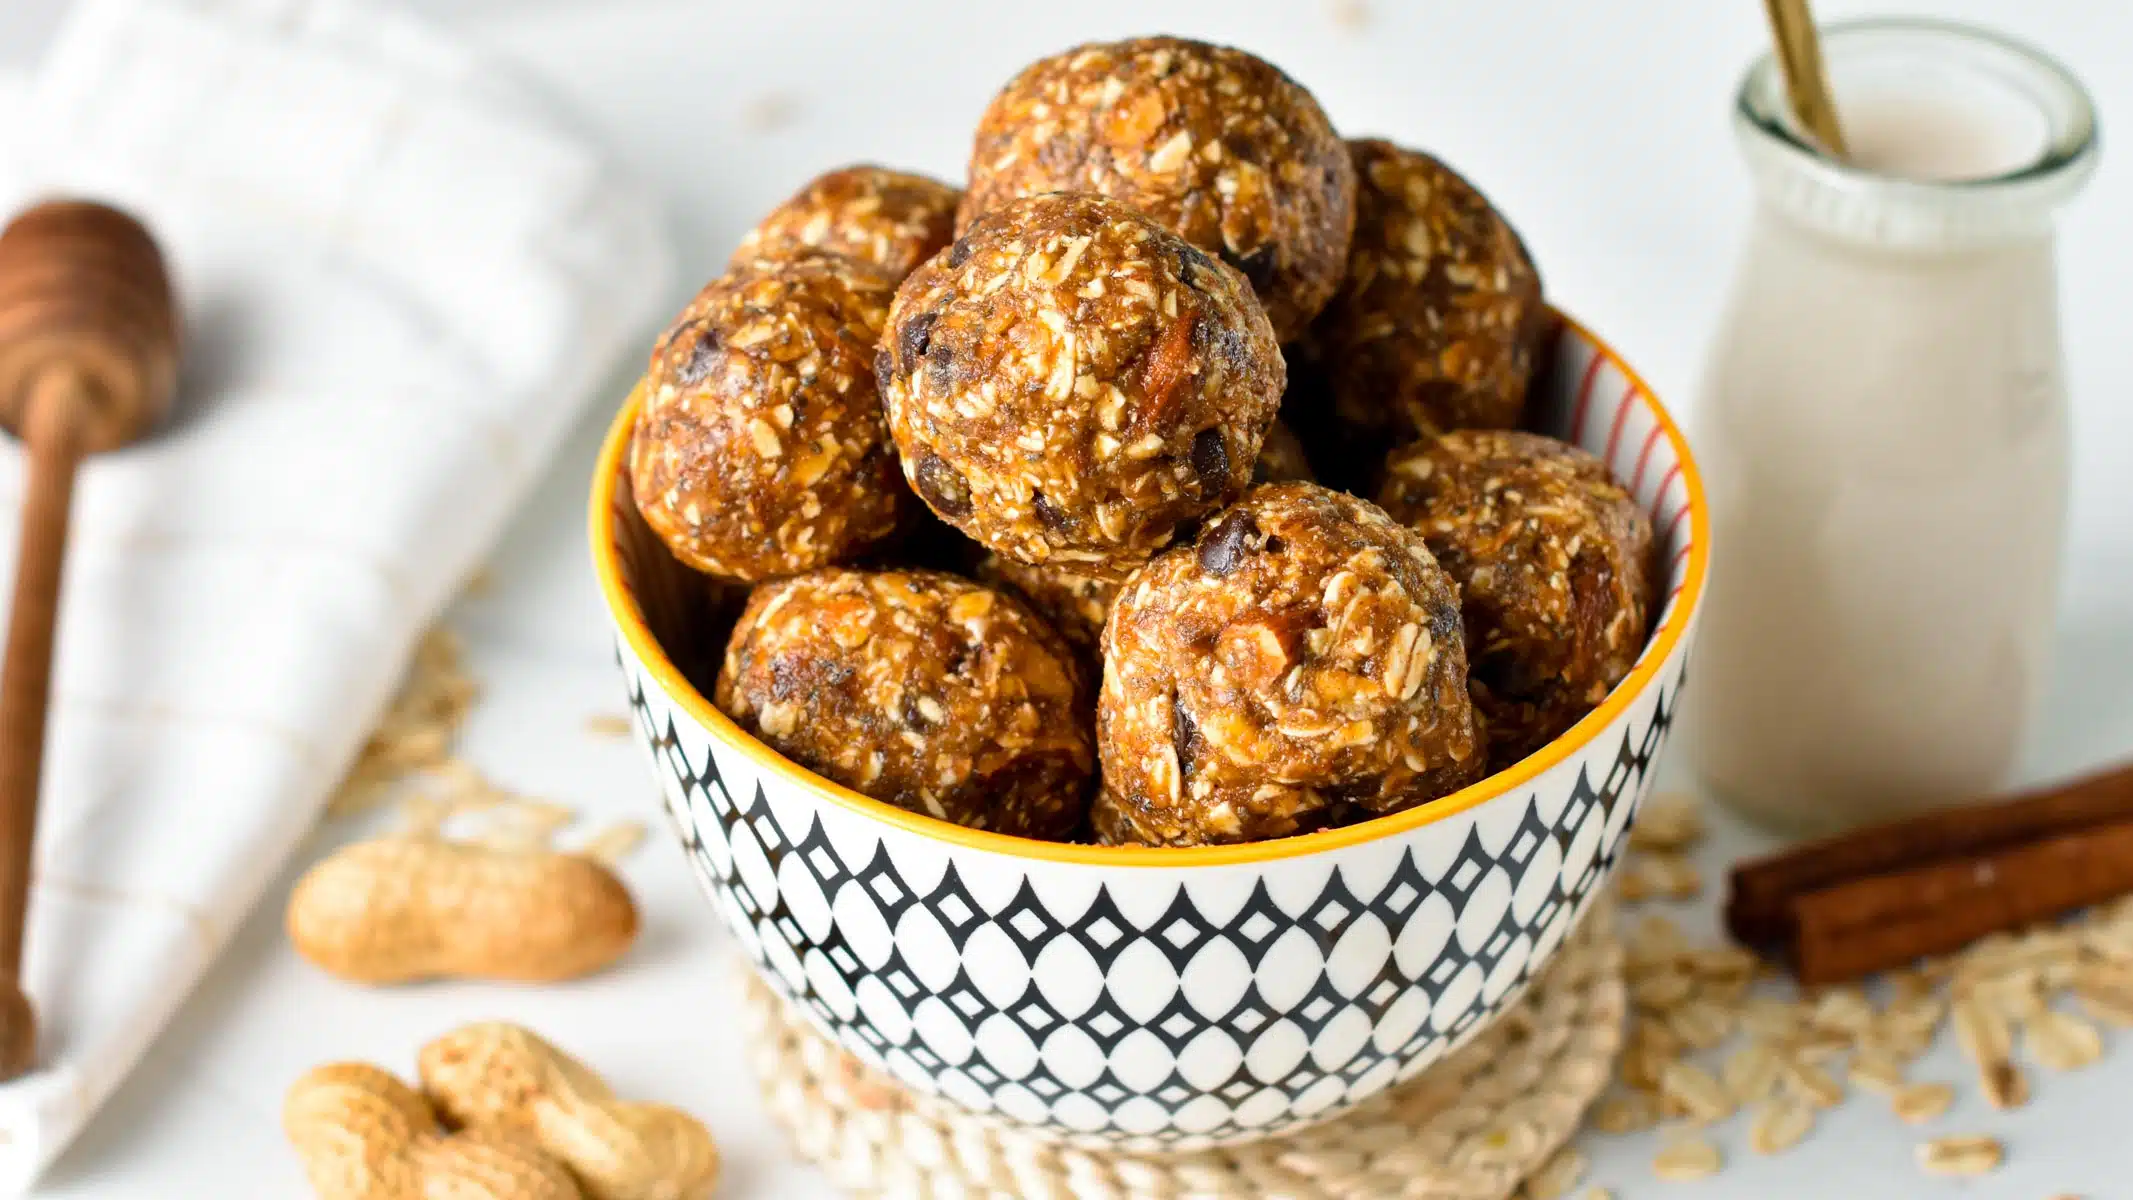 a bowl filled with no bake energy balls made from nuts, dates and called Lactation Balls